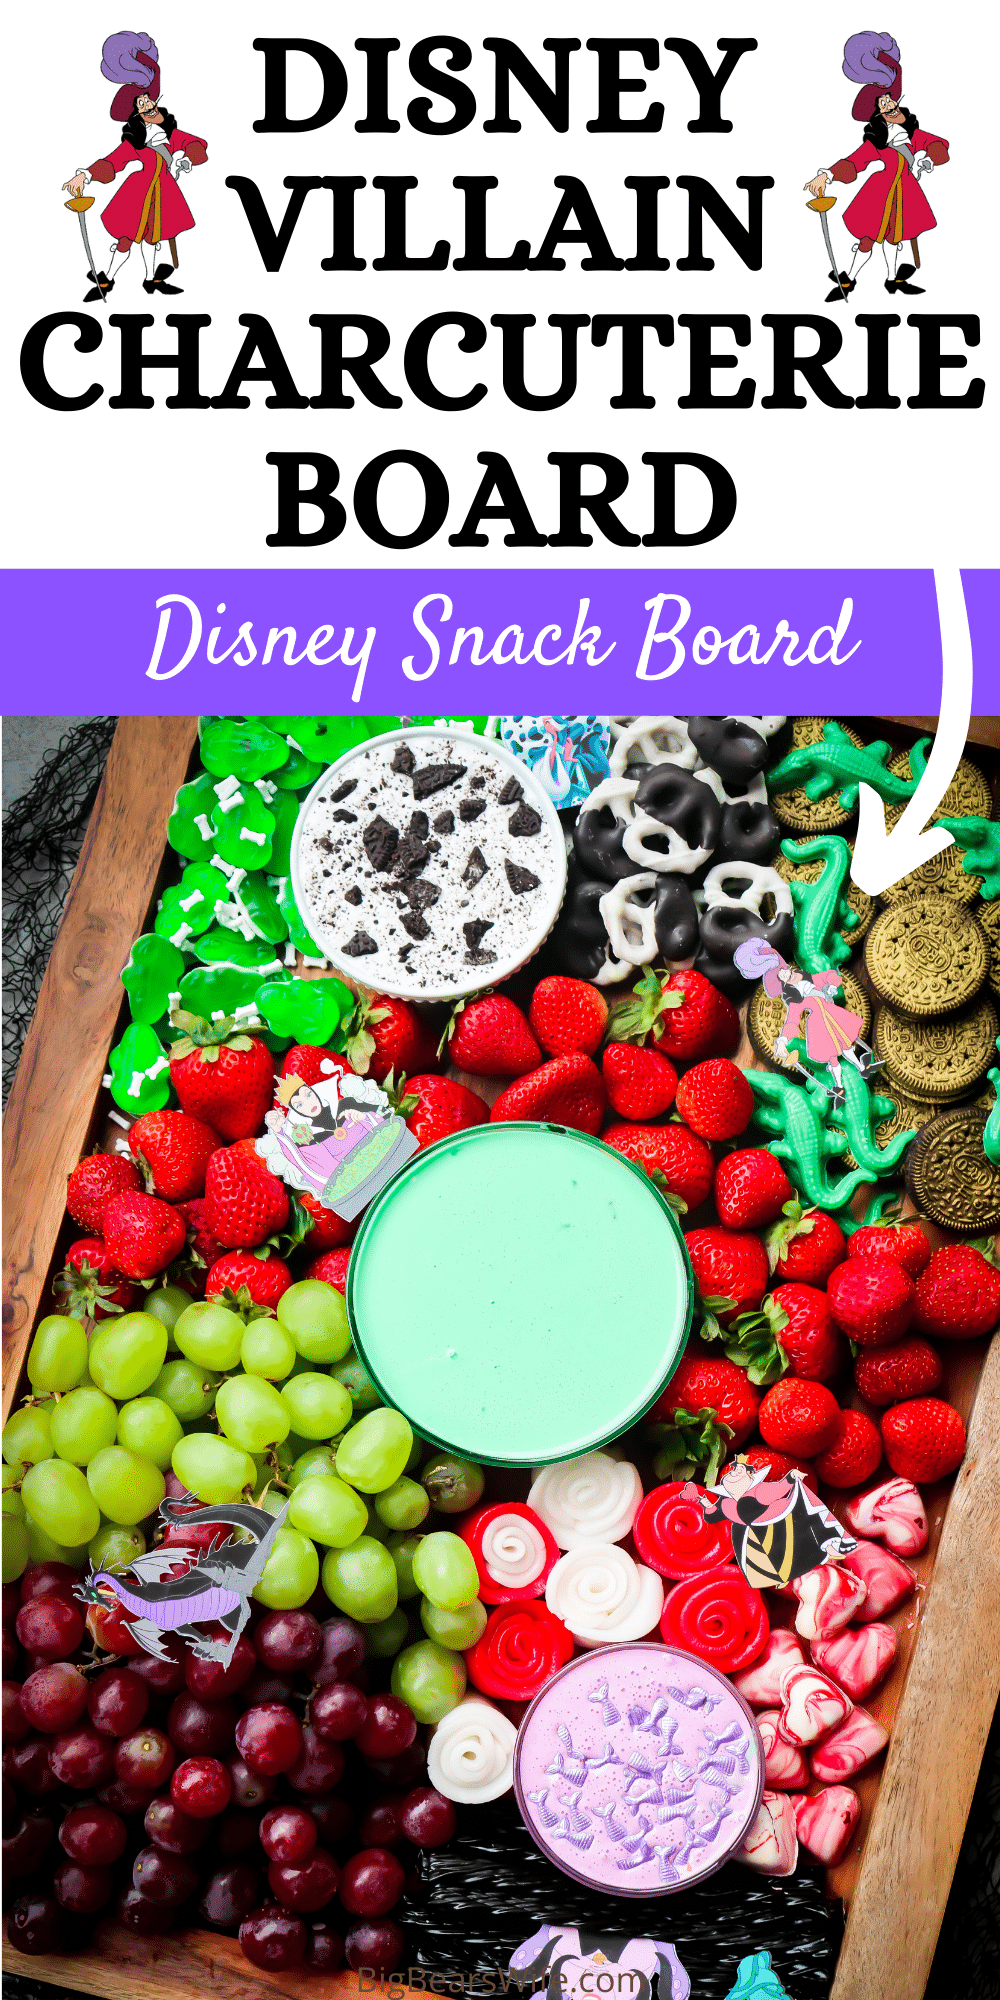 We're celebrating all of the Disney Villains with this Disney Villain Charcuterie Board! It is a fun Disney Snack board to celebrate our favorite Villains for Halloween! via @bigbearswife